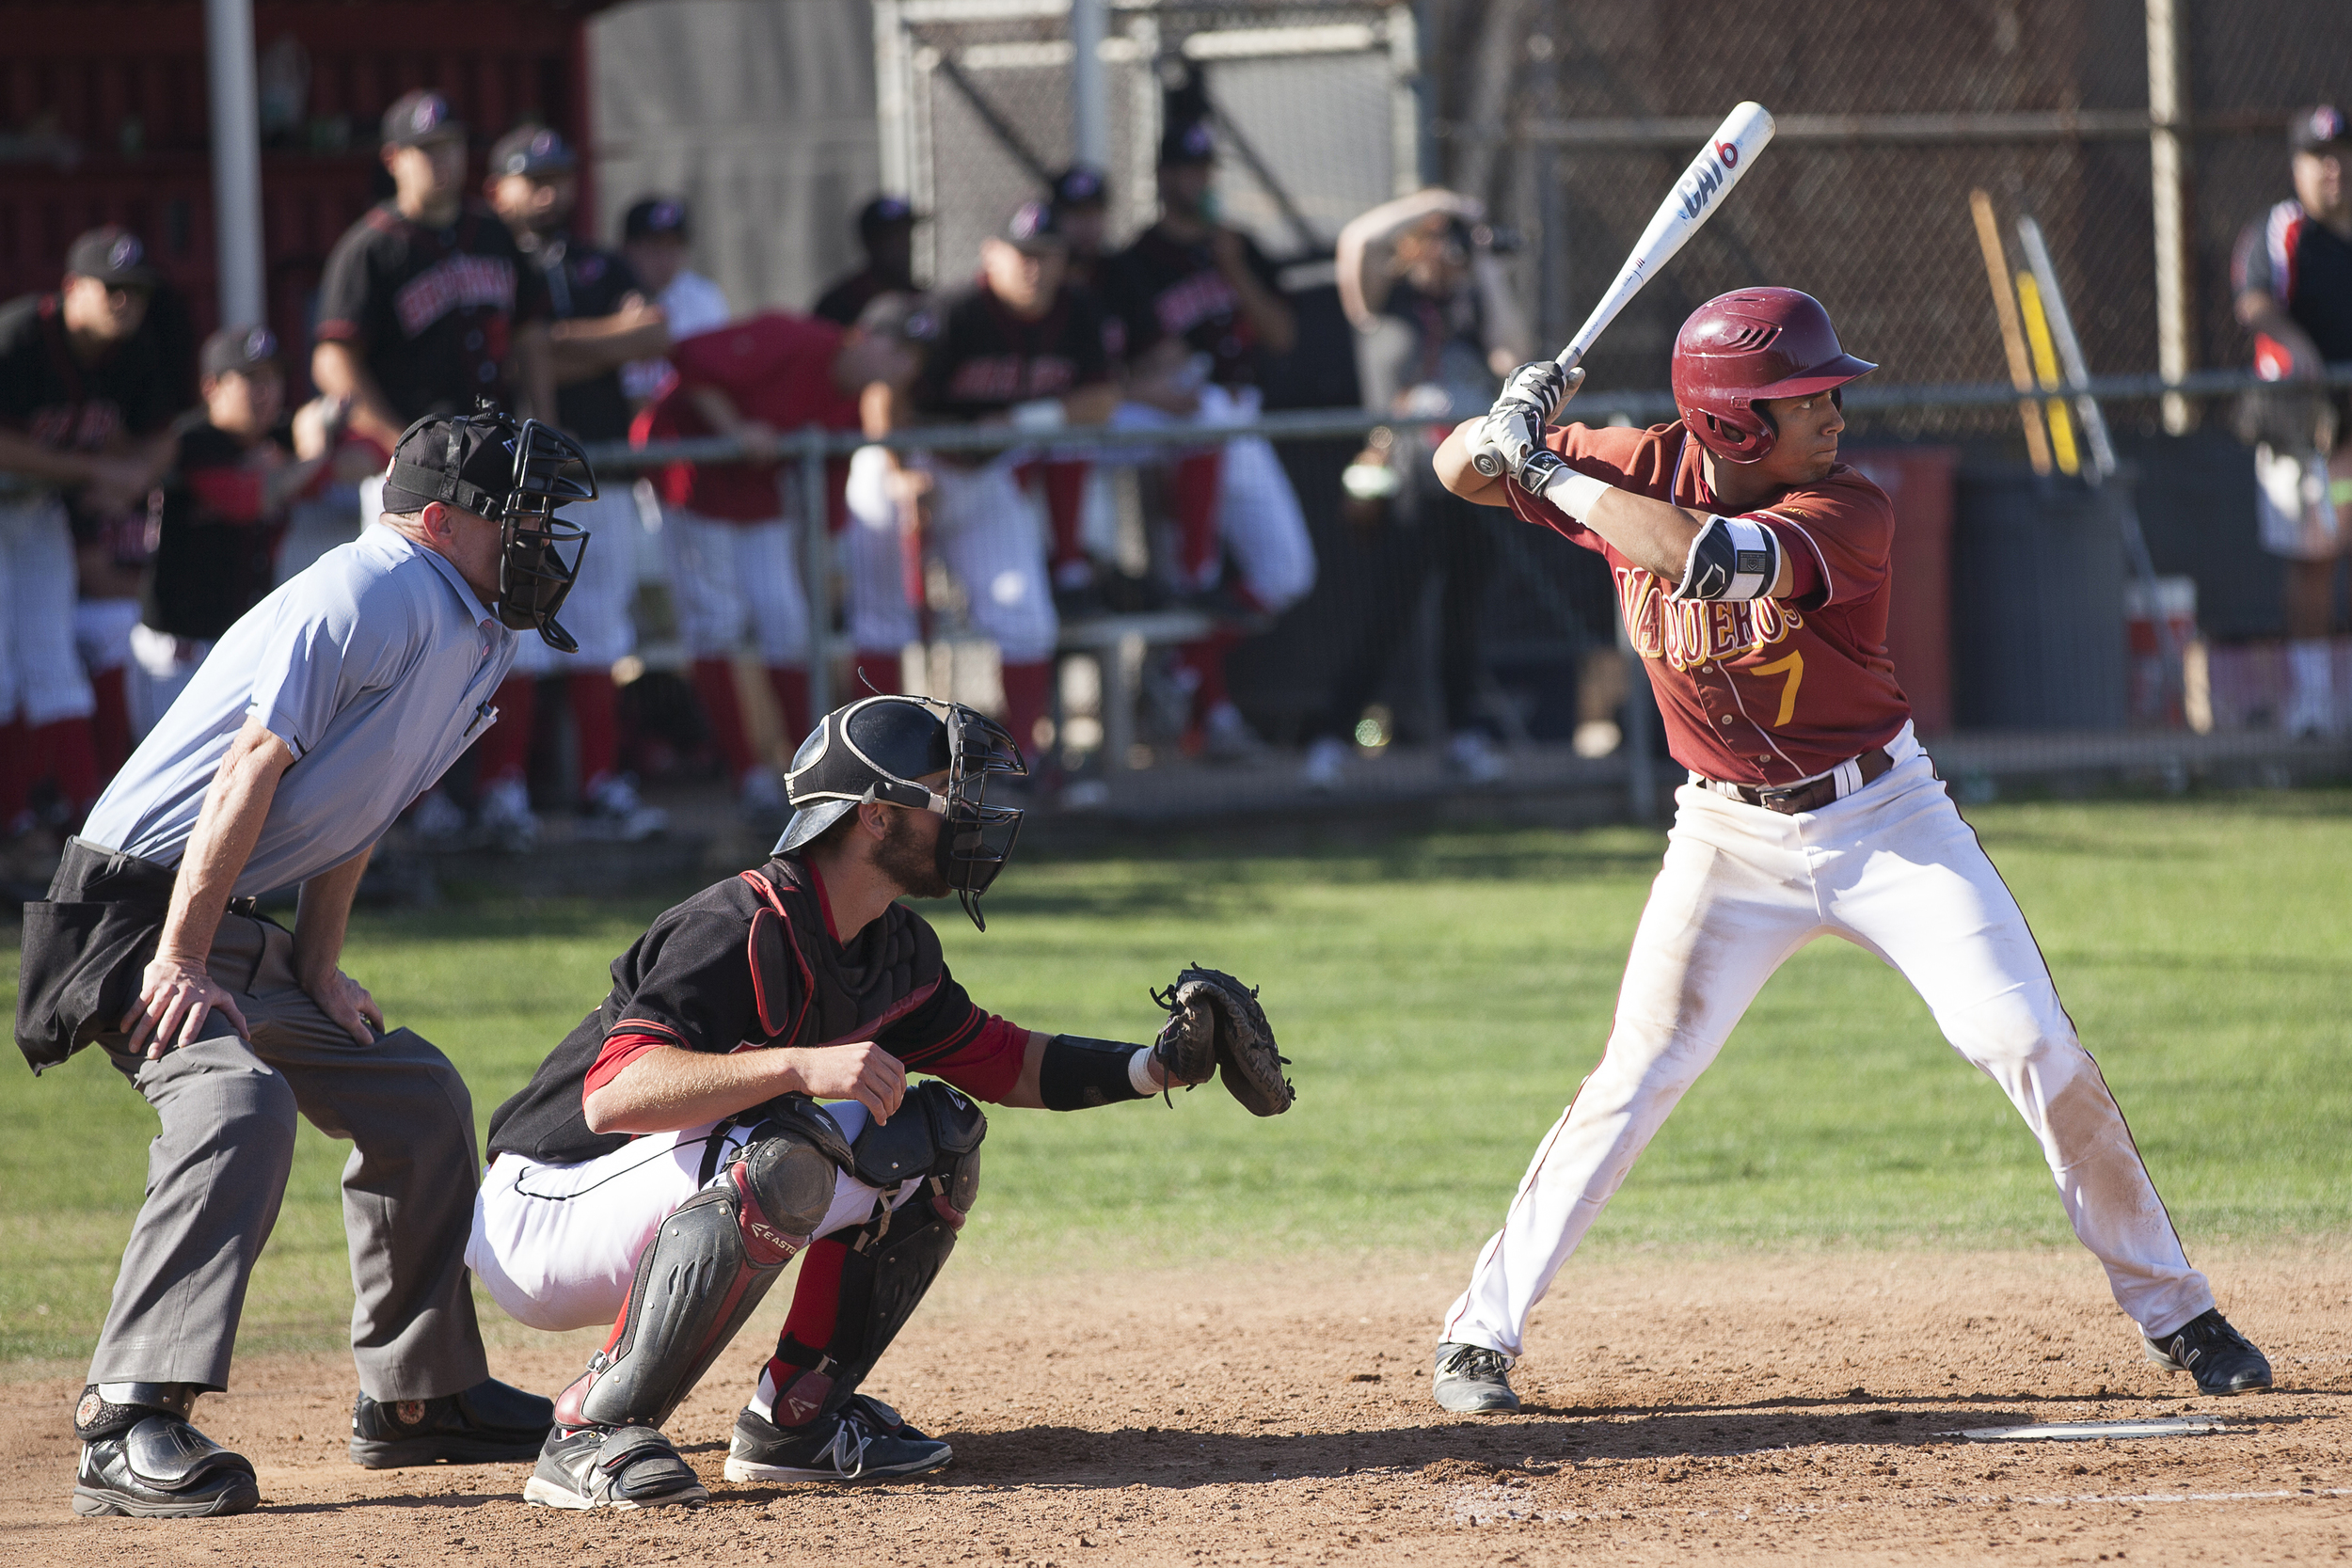  Glendale College outfielder Cristian Montes goes up to bat in a game against Pierce College on Saturday, Feb. 13, 2016 in Woodland Hills, Calif. Glendale would go on to win the game with a score of 15-6.&nbsp; 